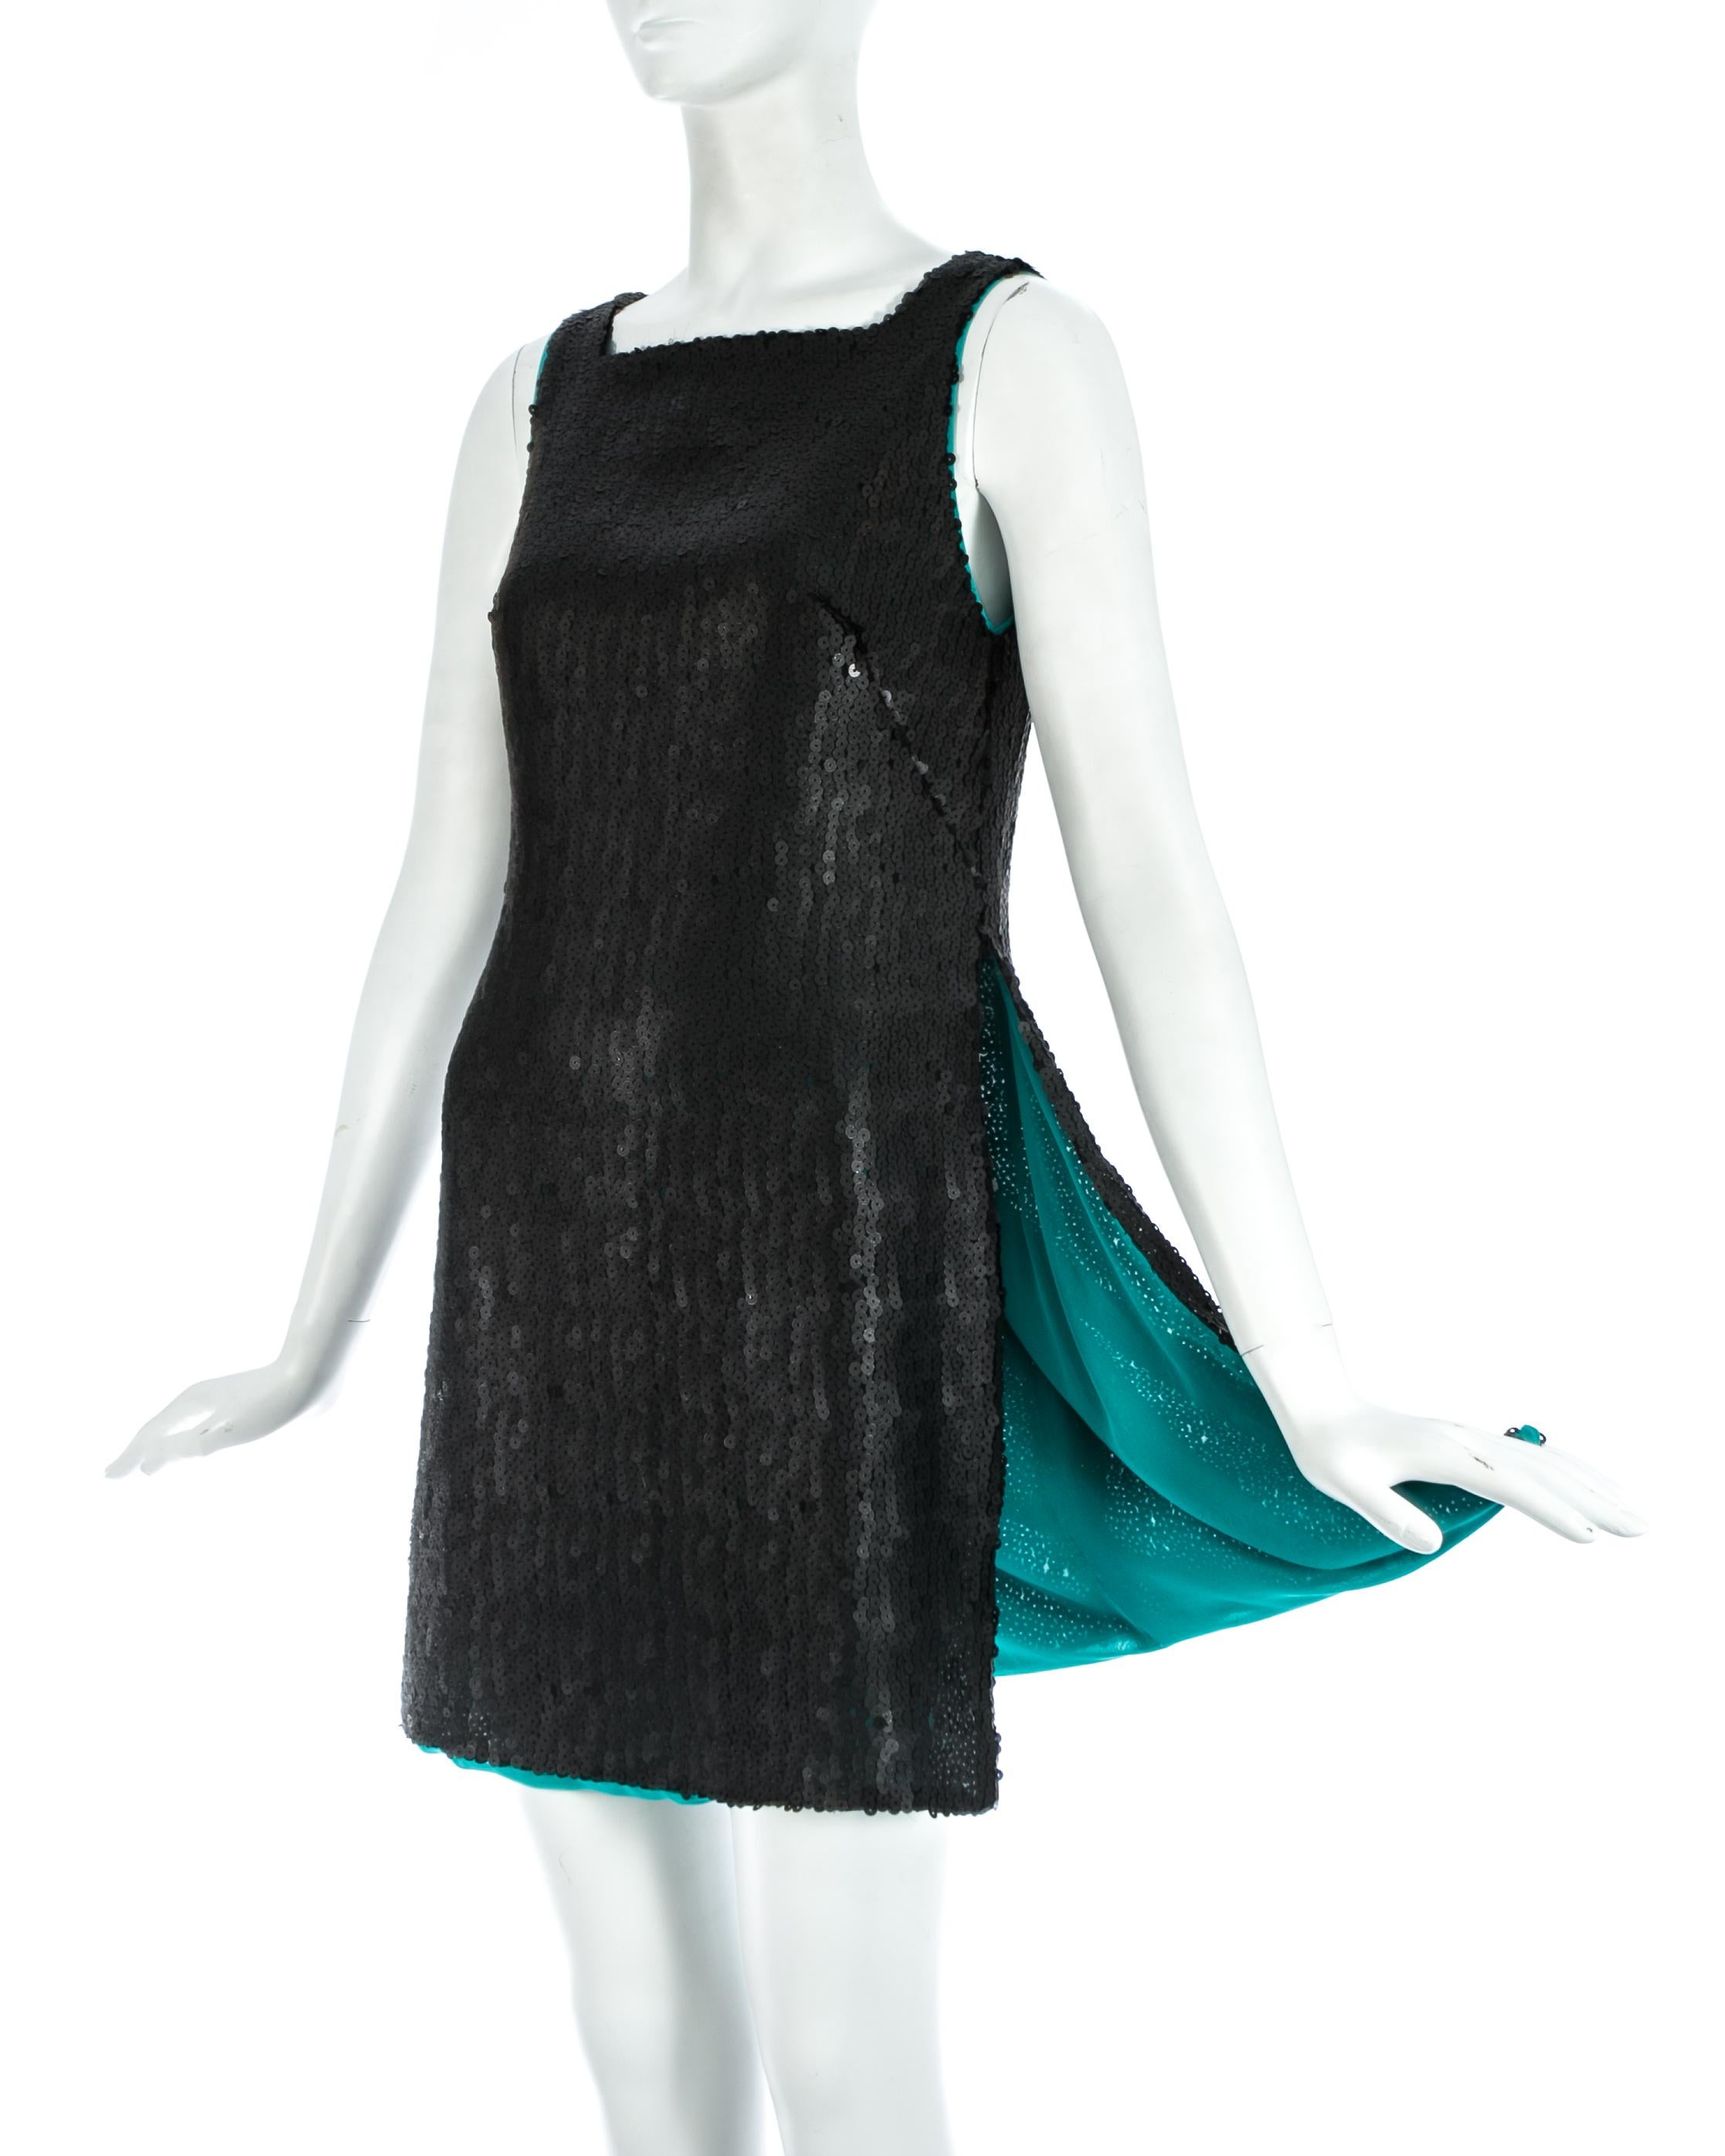 Black sequin mini dress / tunic with extra high side slits and turquoise silk chiffon lining 

Autumn-Winter 1999